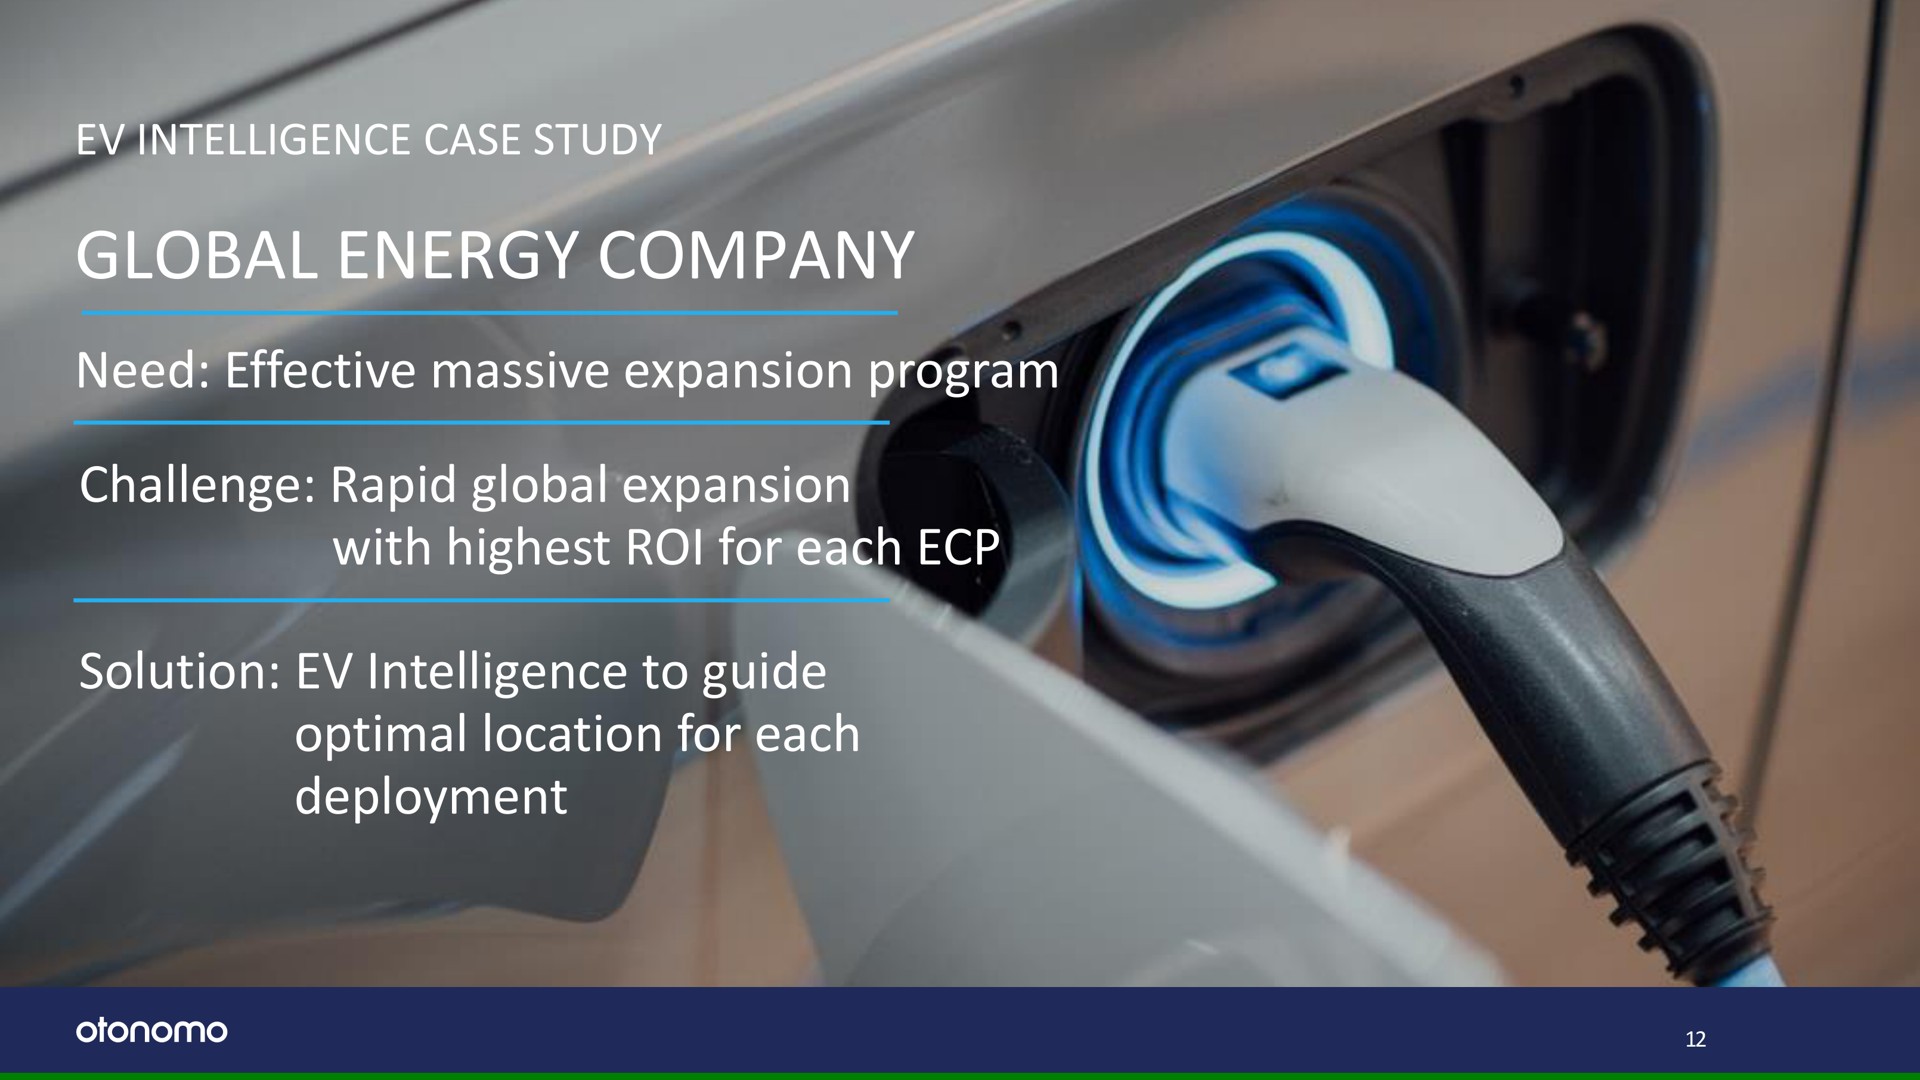 intelligence case study global energy company need effective massive expansion program challenge rapid global expansion with highest roi for each solution intelligence to guide optimal location for each deployment tog elects he tay | Otonomo